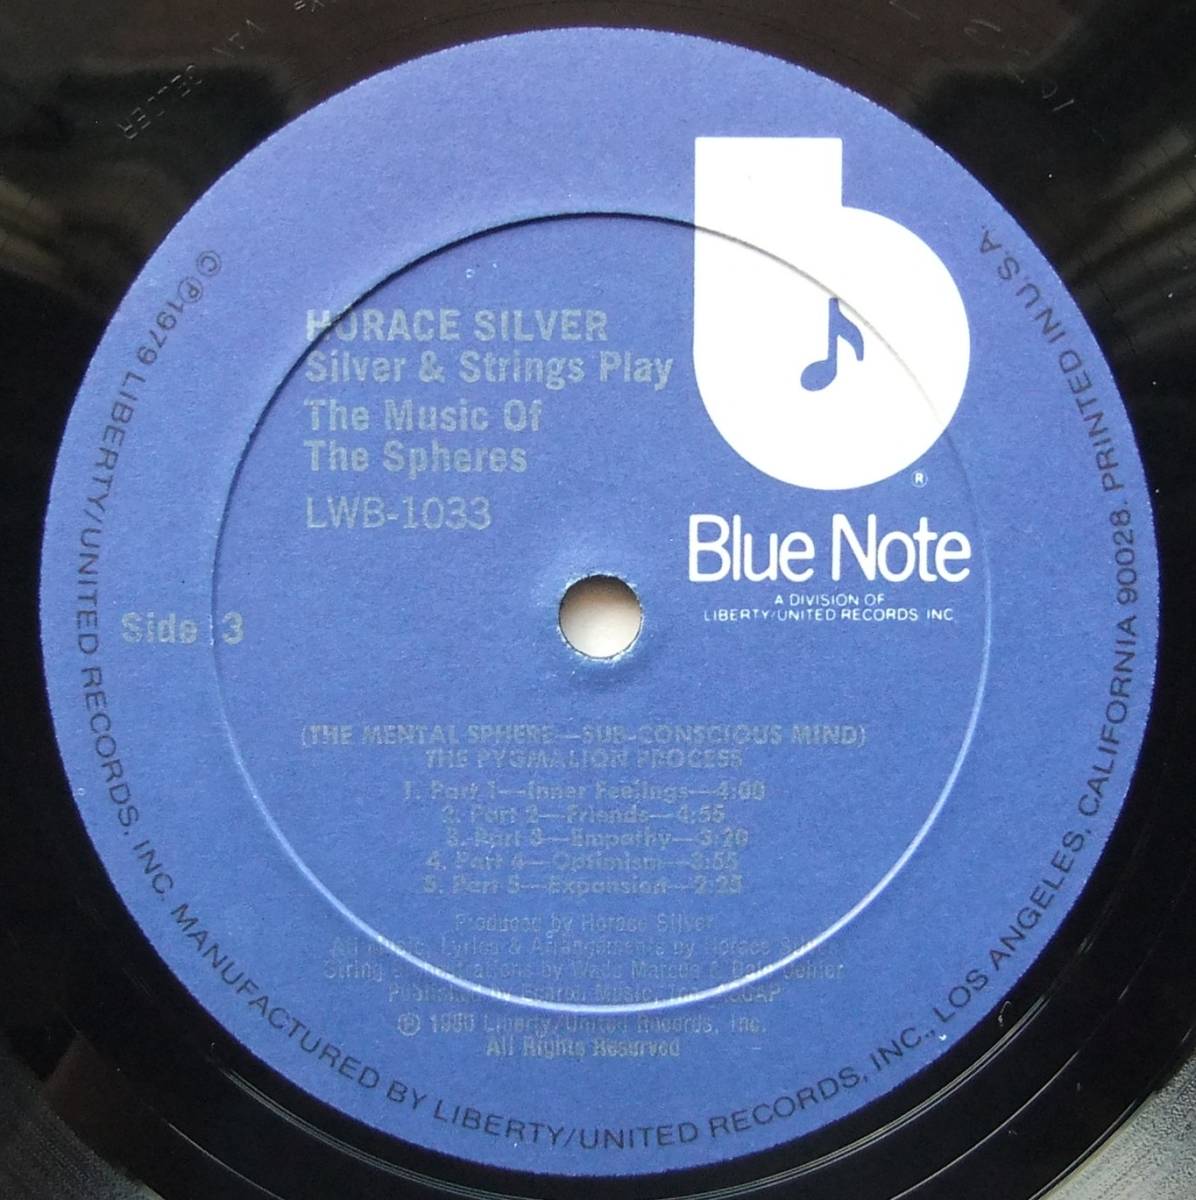 ◆ HORACE SILVER / Silver 'N Play The Music of the Spheres (2 LP) ◆ Blue Note LWB-1033 ◆ V_画像7